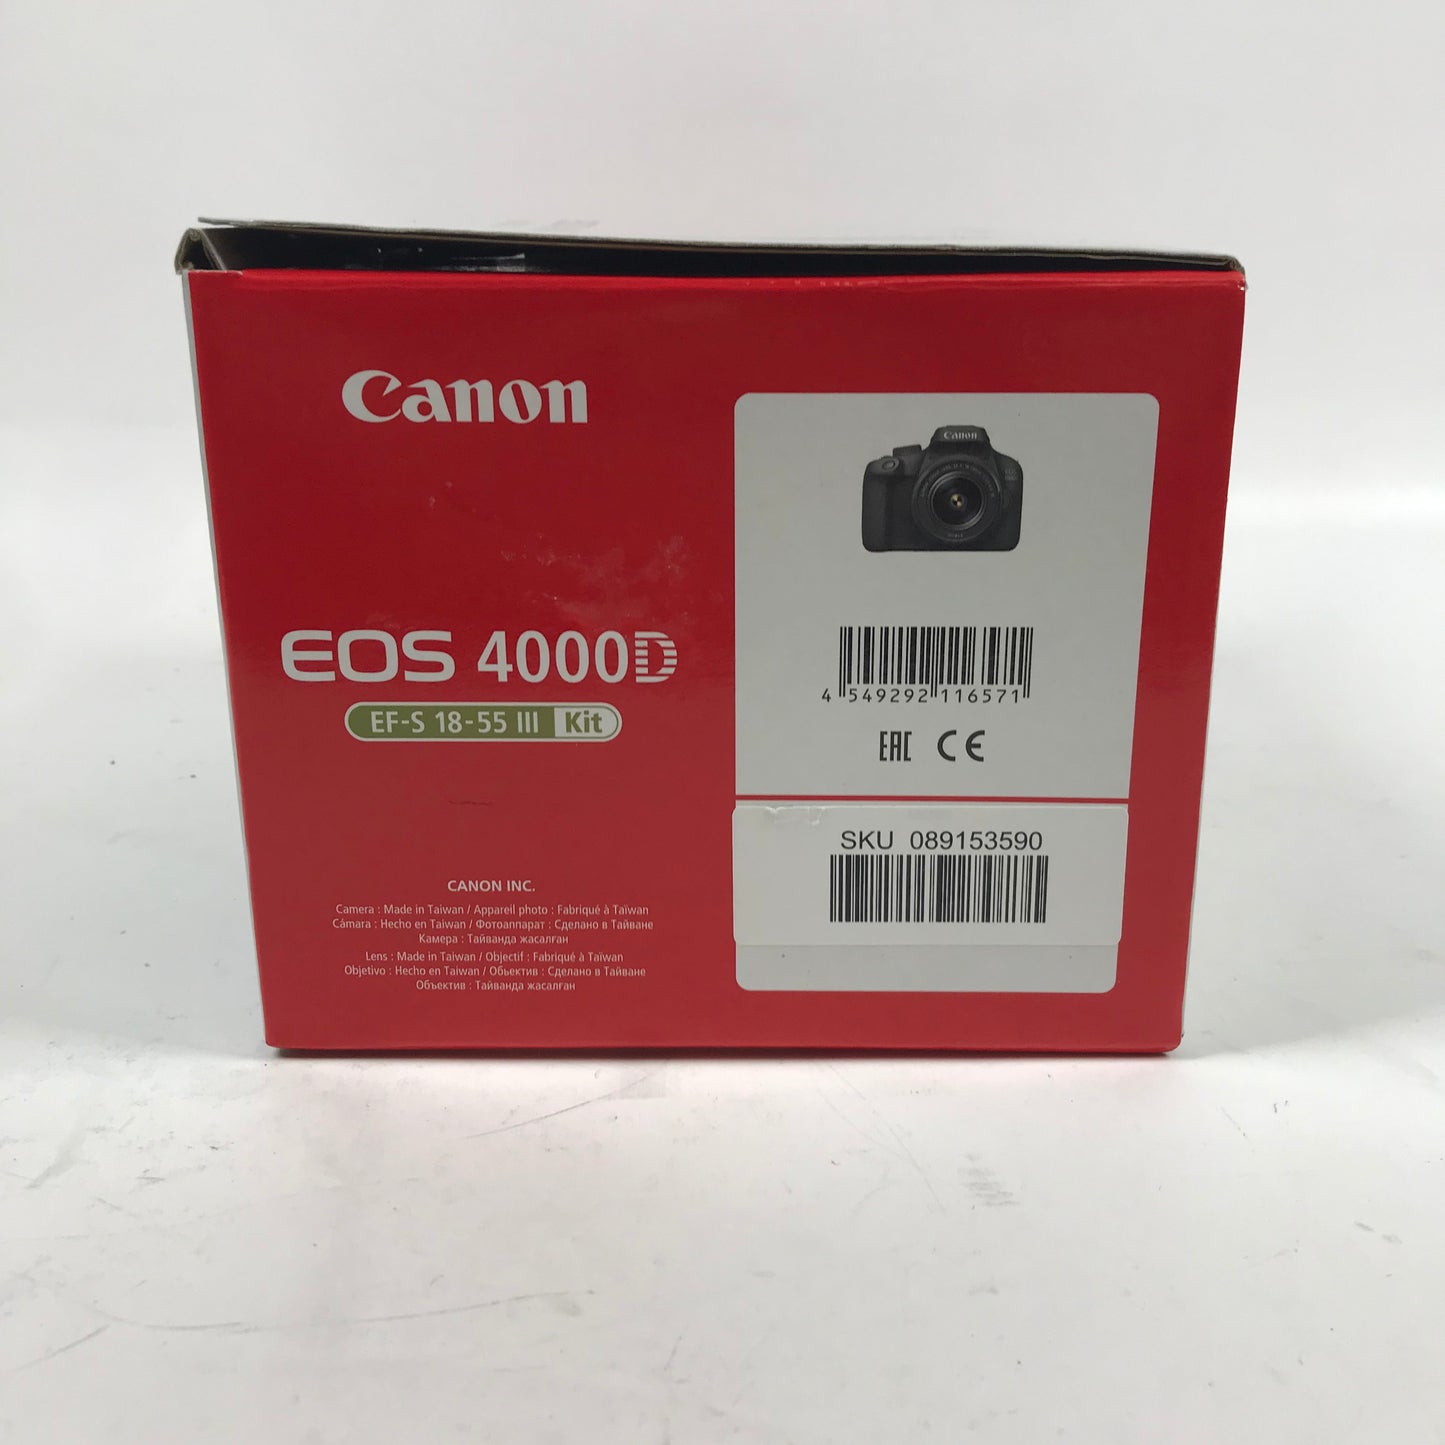 New Canon EOS 4000D 18.0MP Compact SLR Camera EF-S 18-55 III Kit